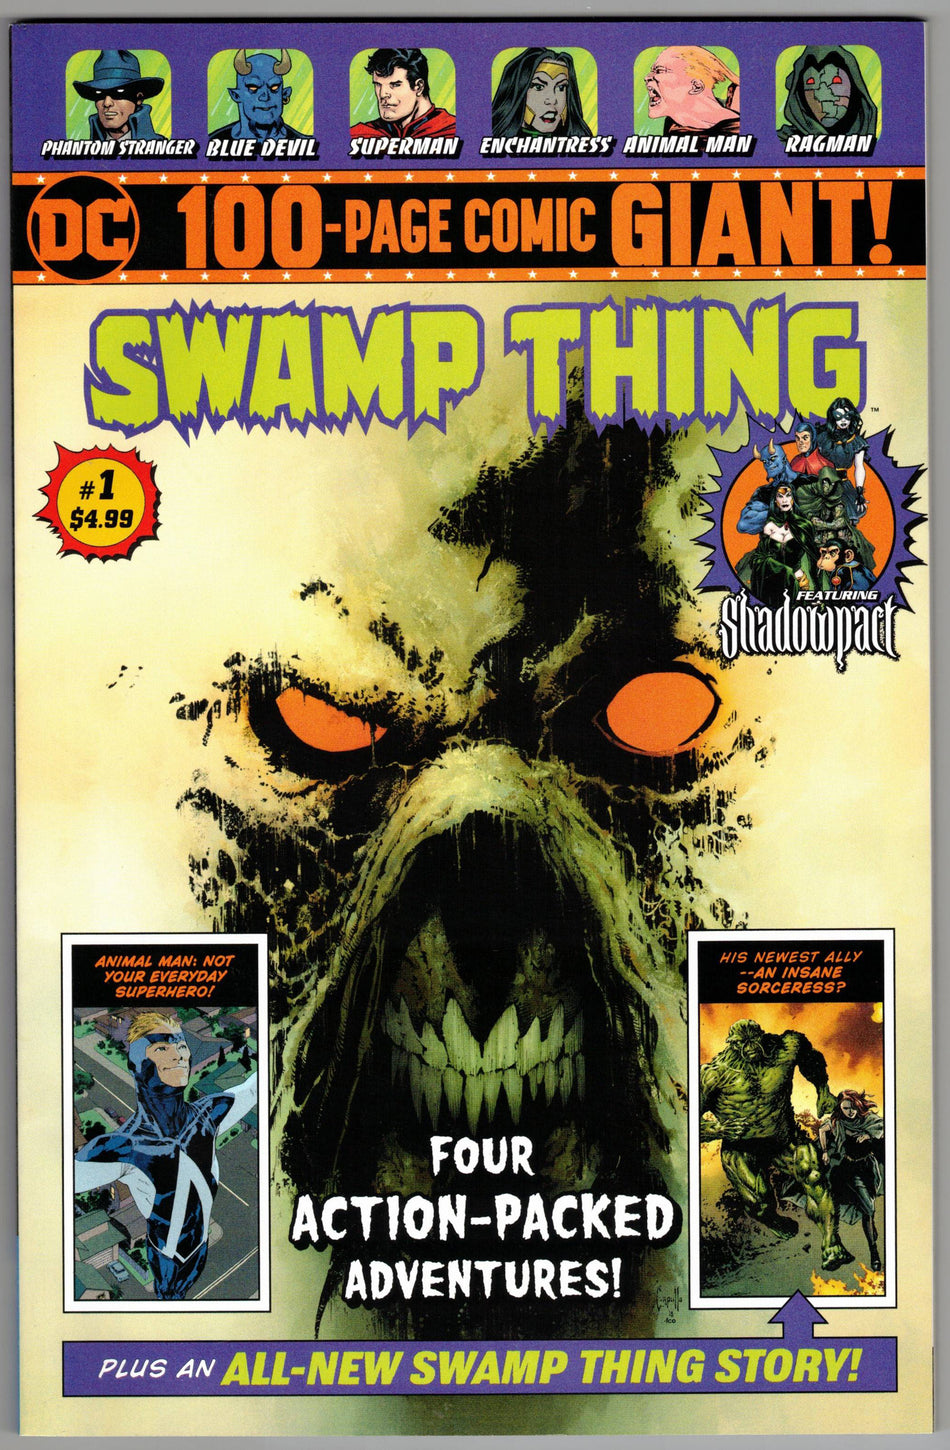 Photo of Swamp Thing 100-Page Giant (2019) Issue 1 - Near Mint Comic sold by Stronghold Collectibles